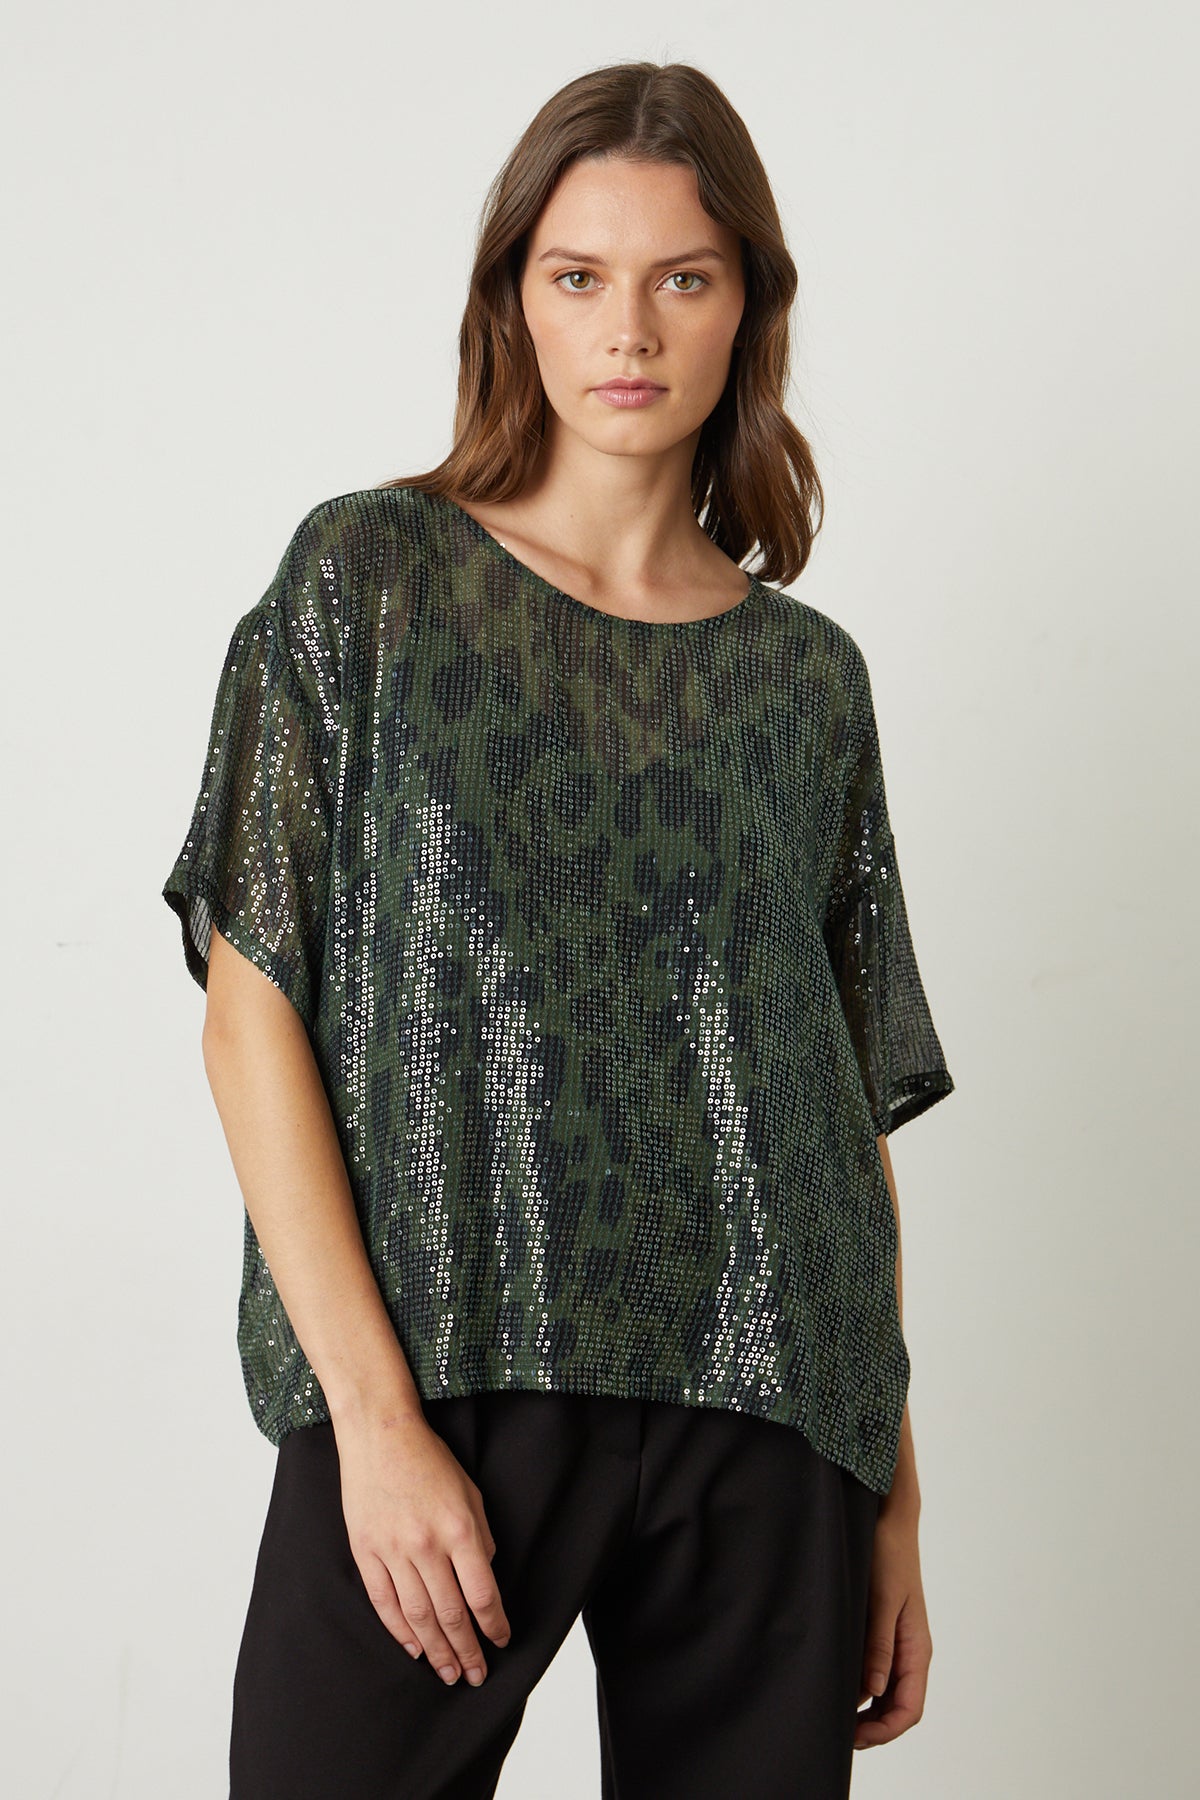 Alessa Printed Sequin Top in airbrush muted green and black mottled pattern front-25668282384577